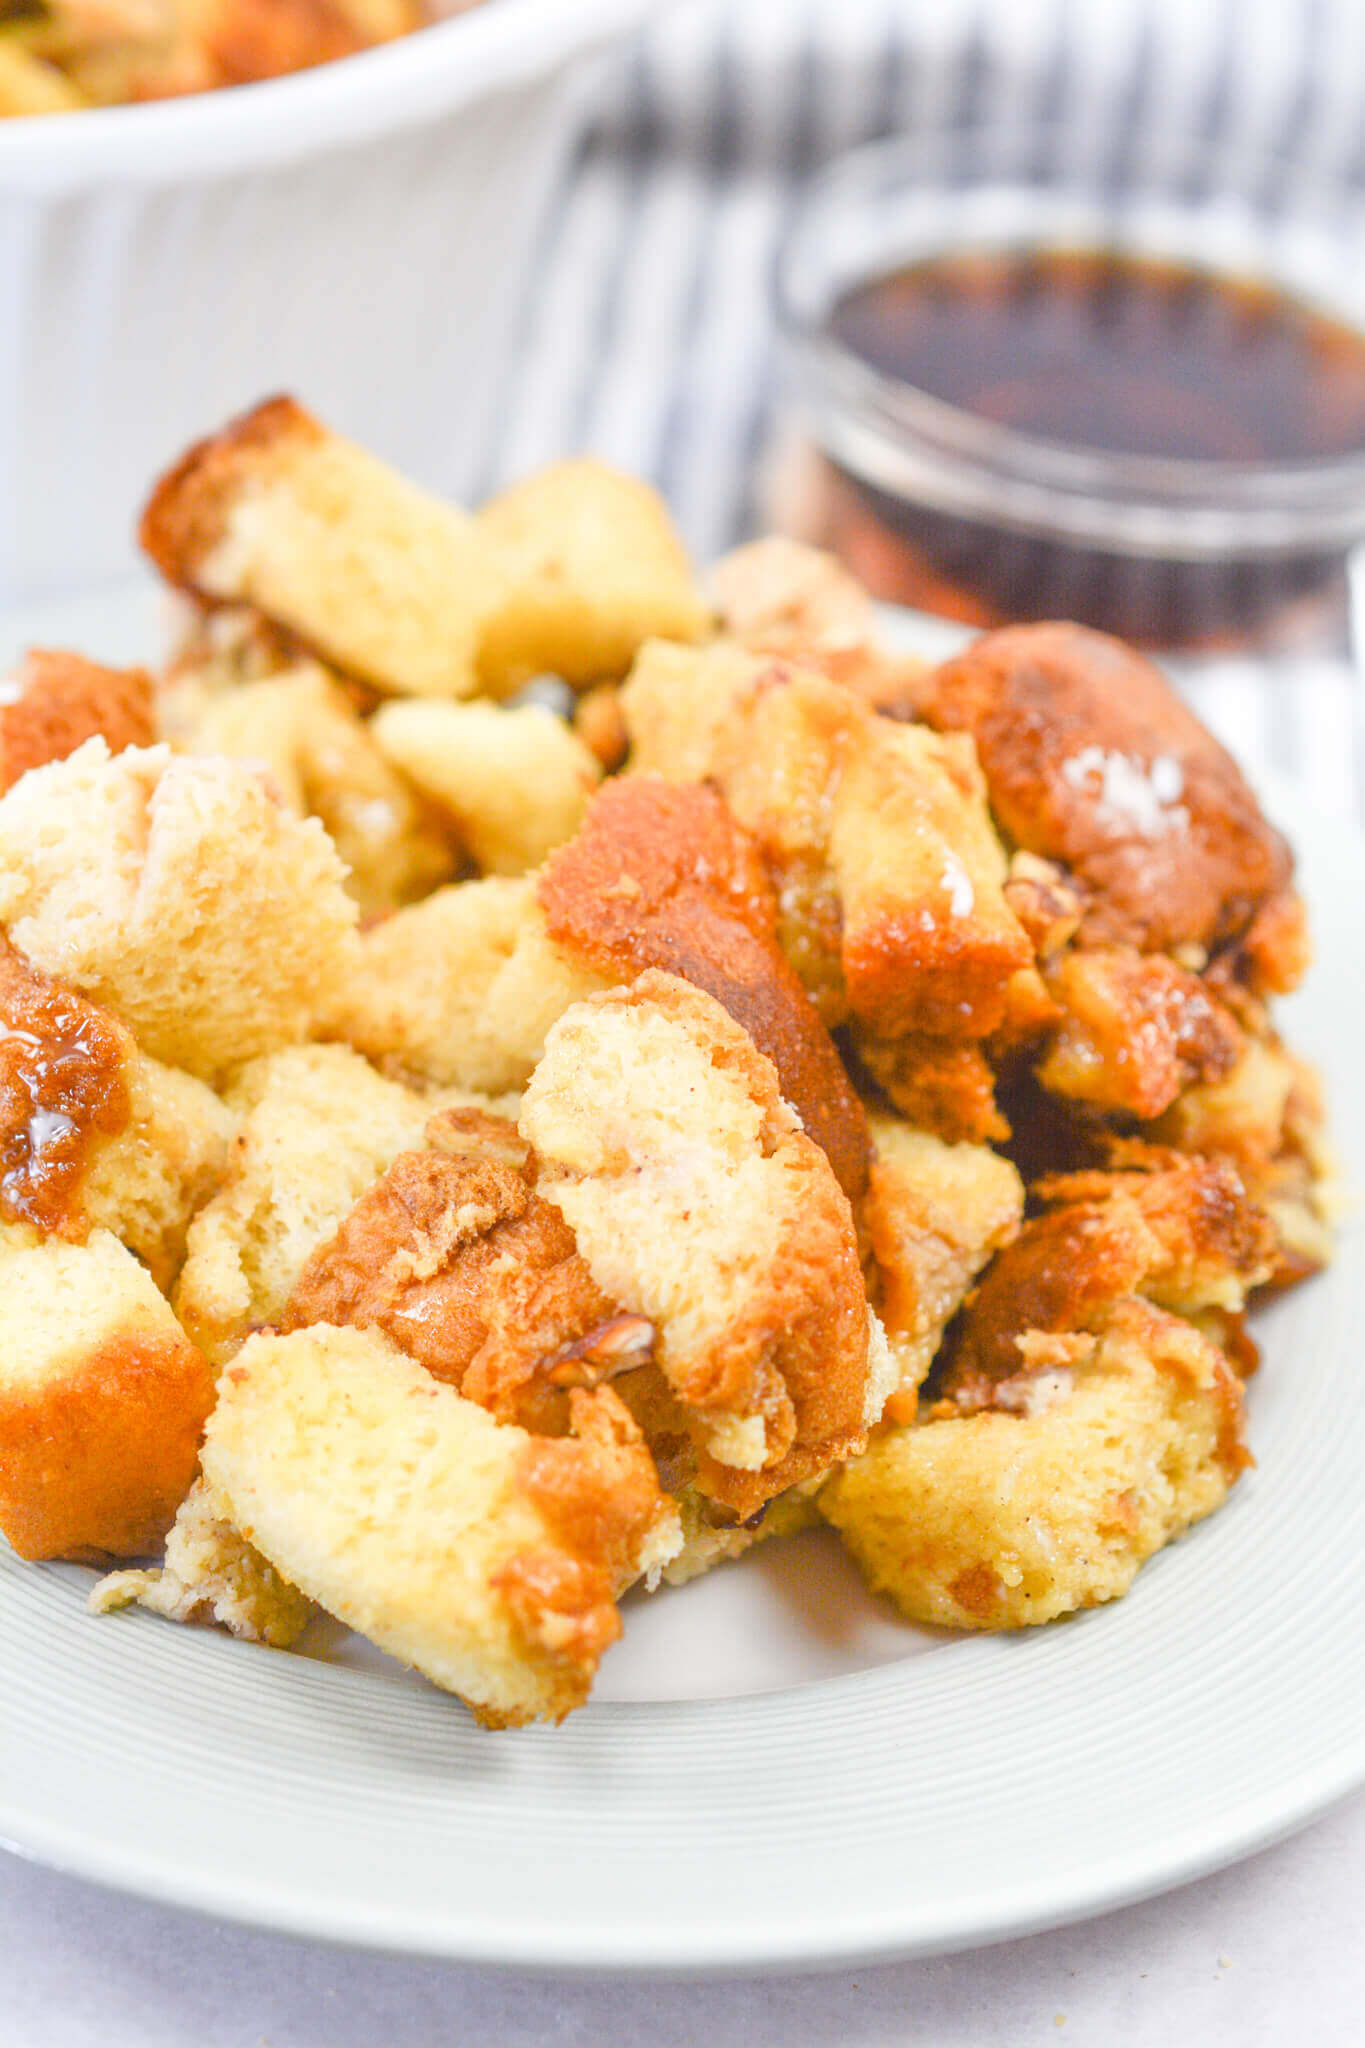 A close up on the Crock Pot French Toast Casserole with Apples.


